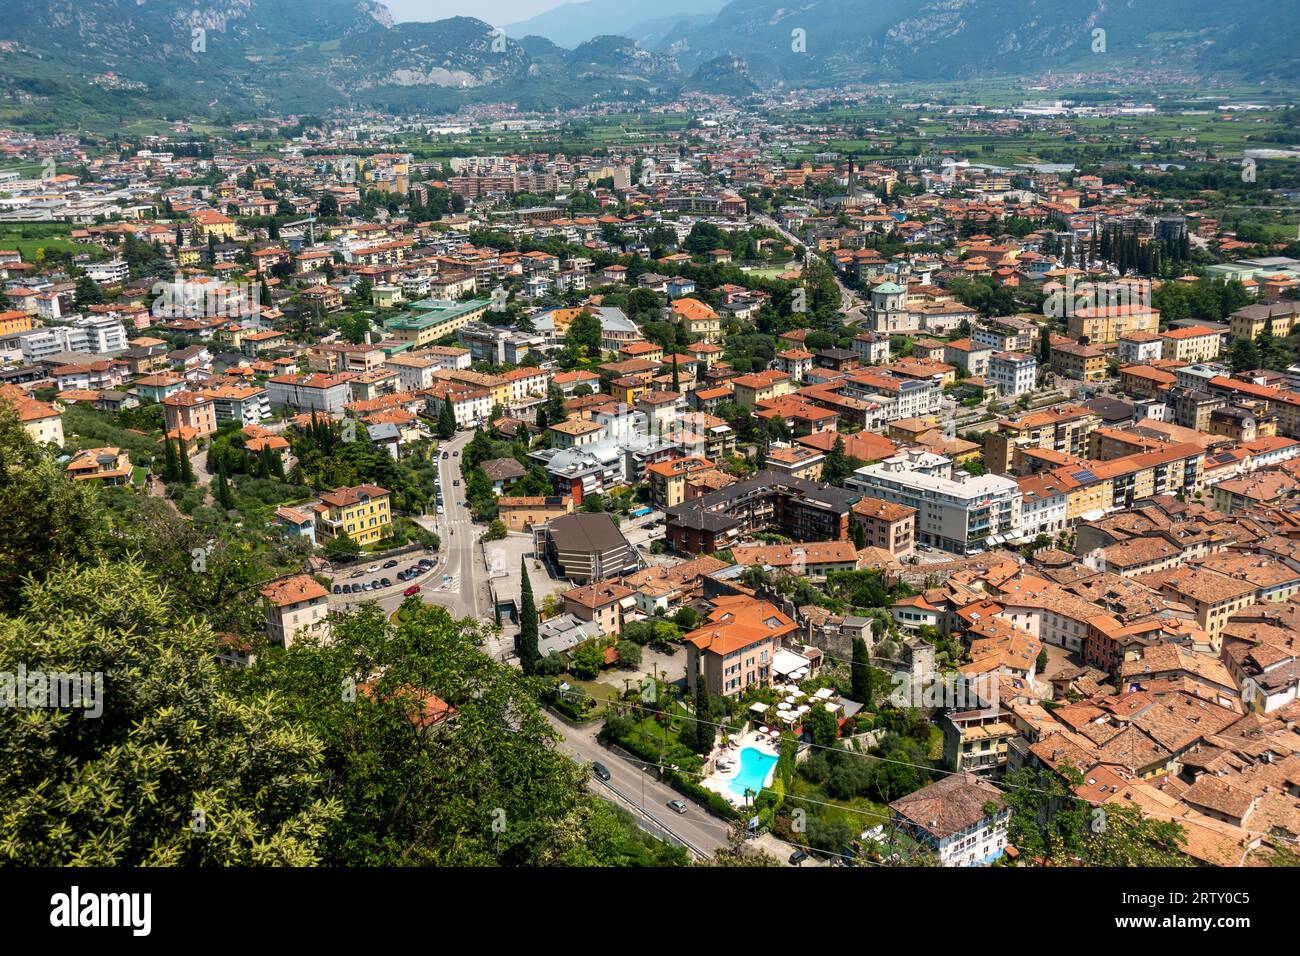 The view from top of the  Scenic lift overlooking Riva del Garda, Province of Trento of the Trentino Alto Adige region, Italy Stock Photo